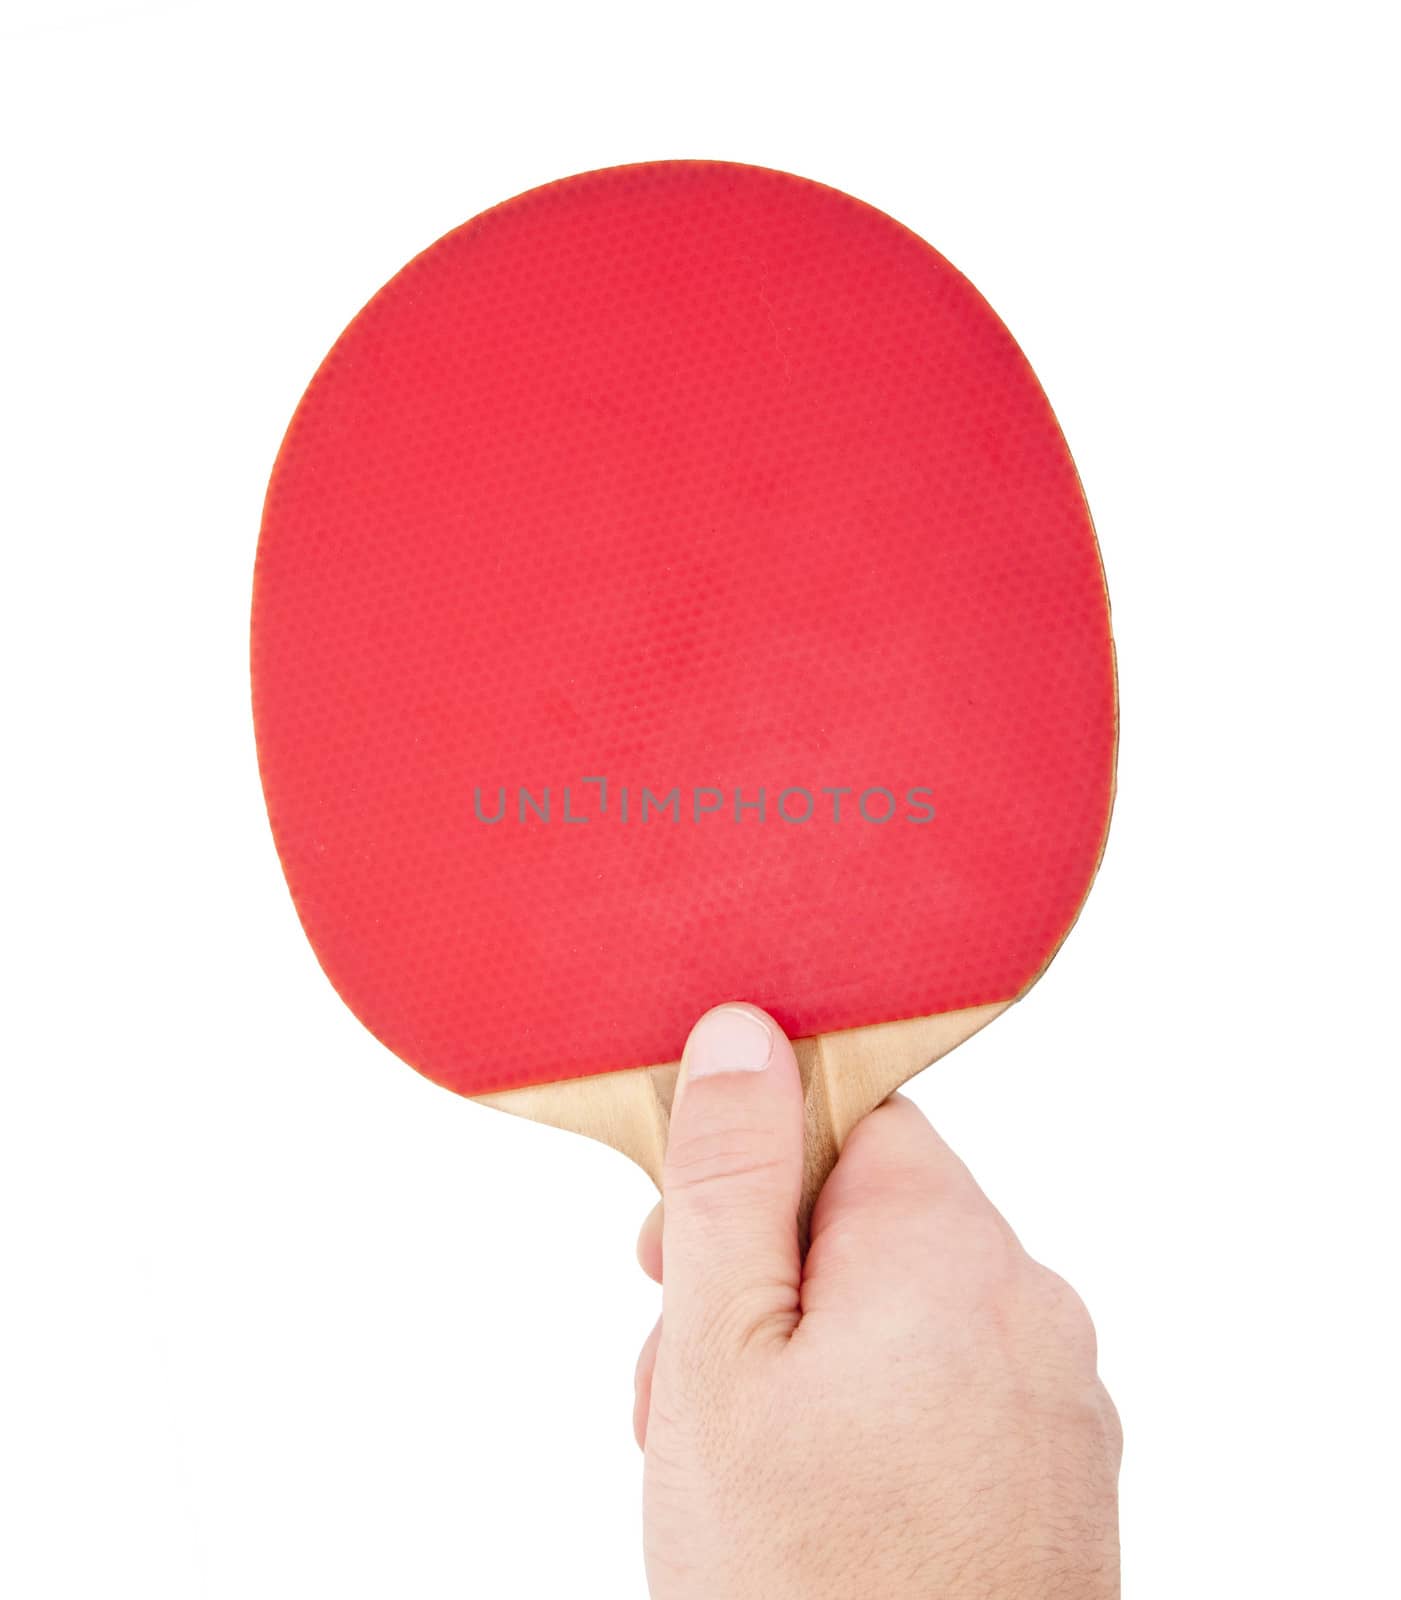 Red table tennis racket in the hand by shutswis